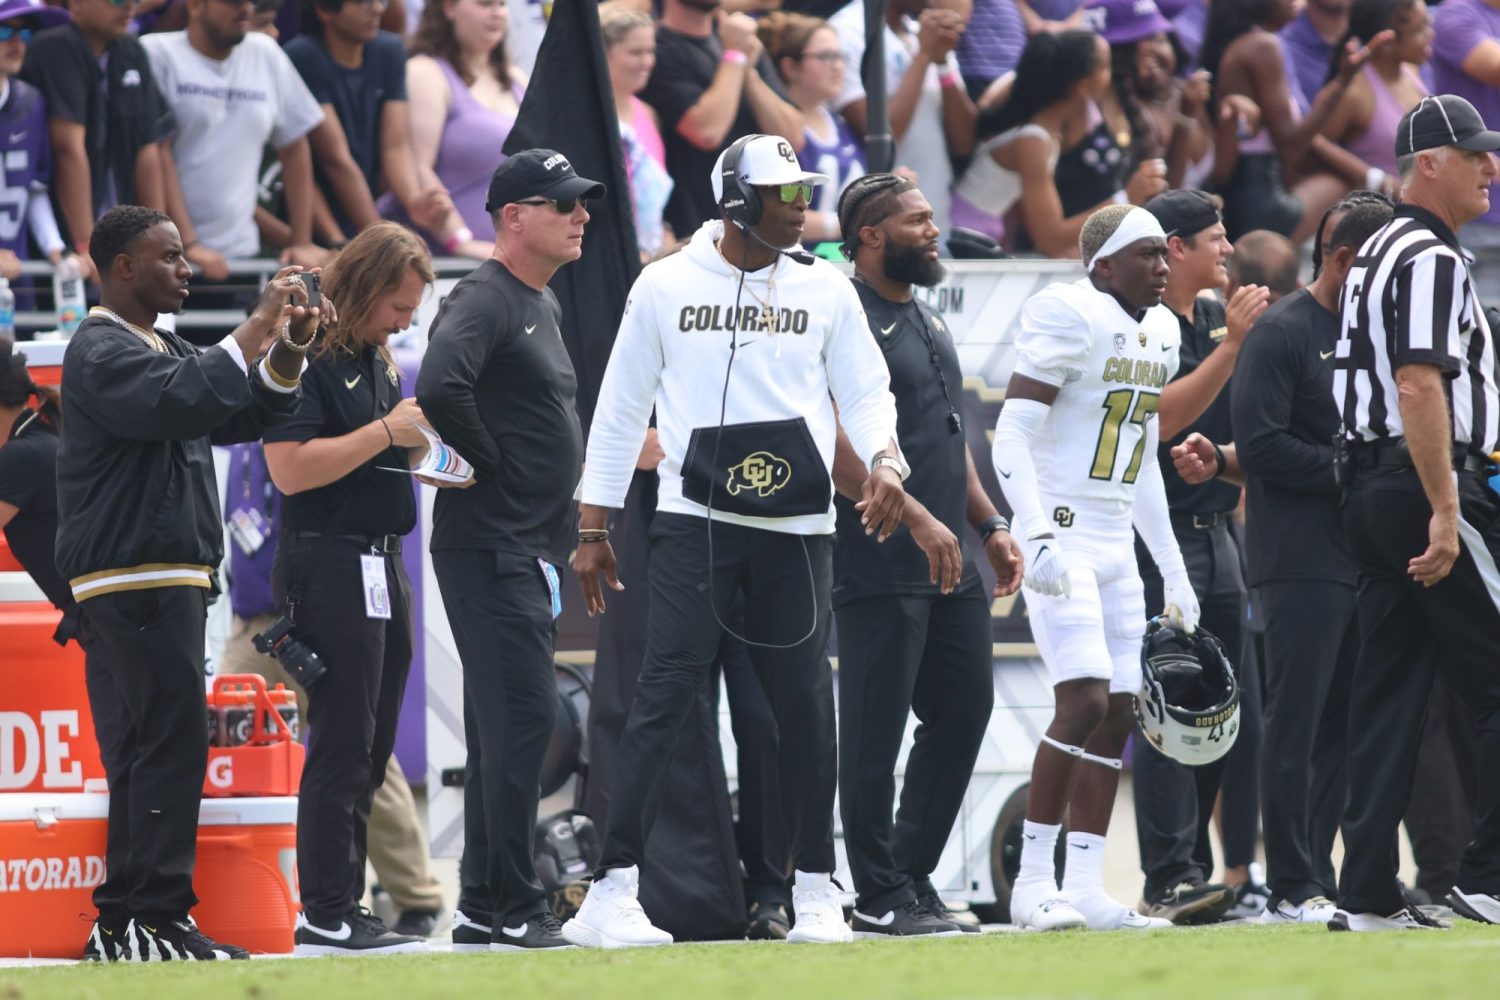 Colorado Buffaloes head coach Deion Sanders on the sidelines during the game against the TCU Horned Frogs at Amon G. Carter Stadium.